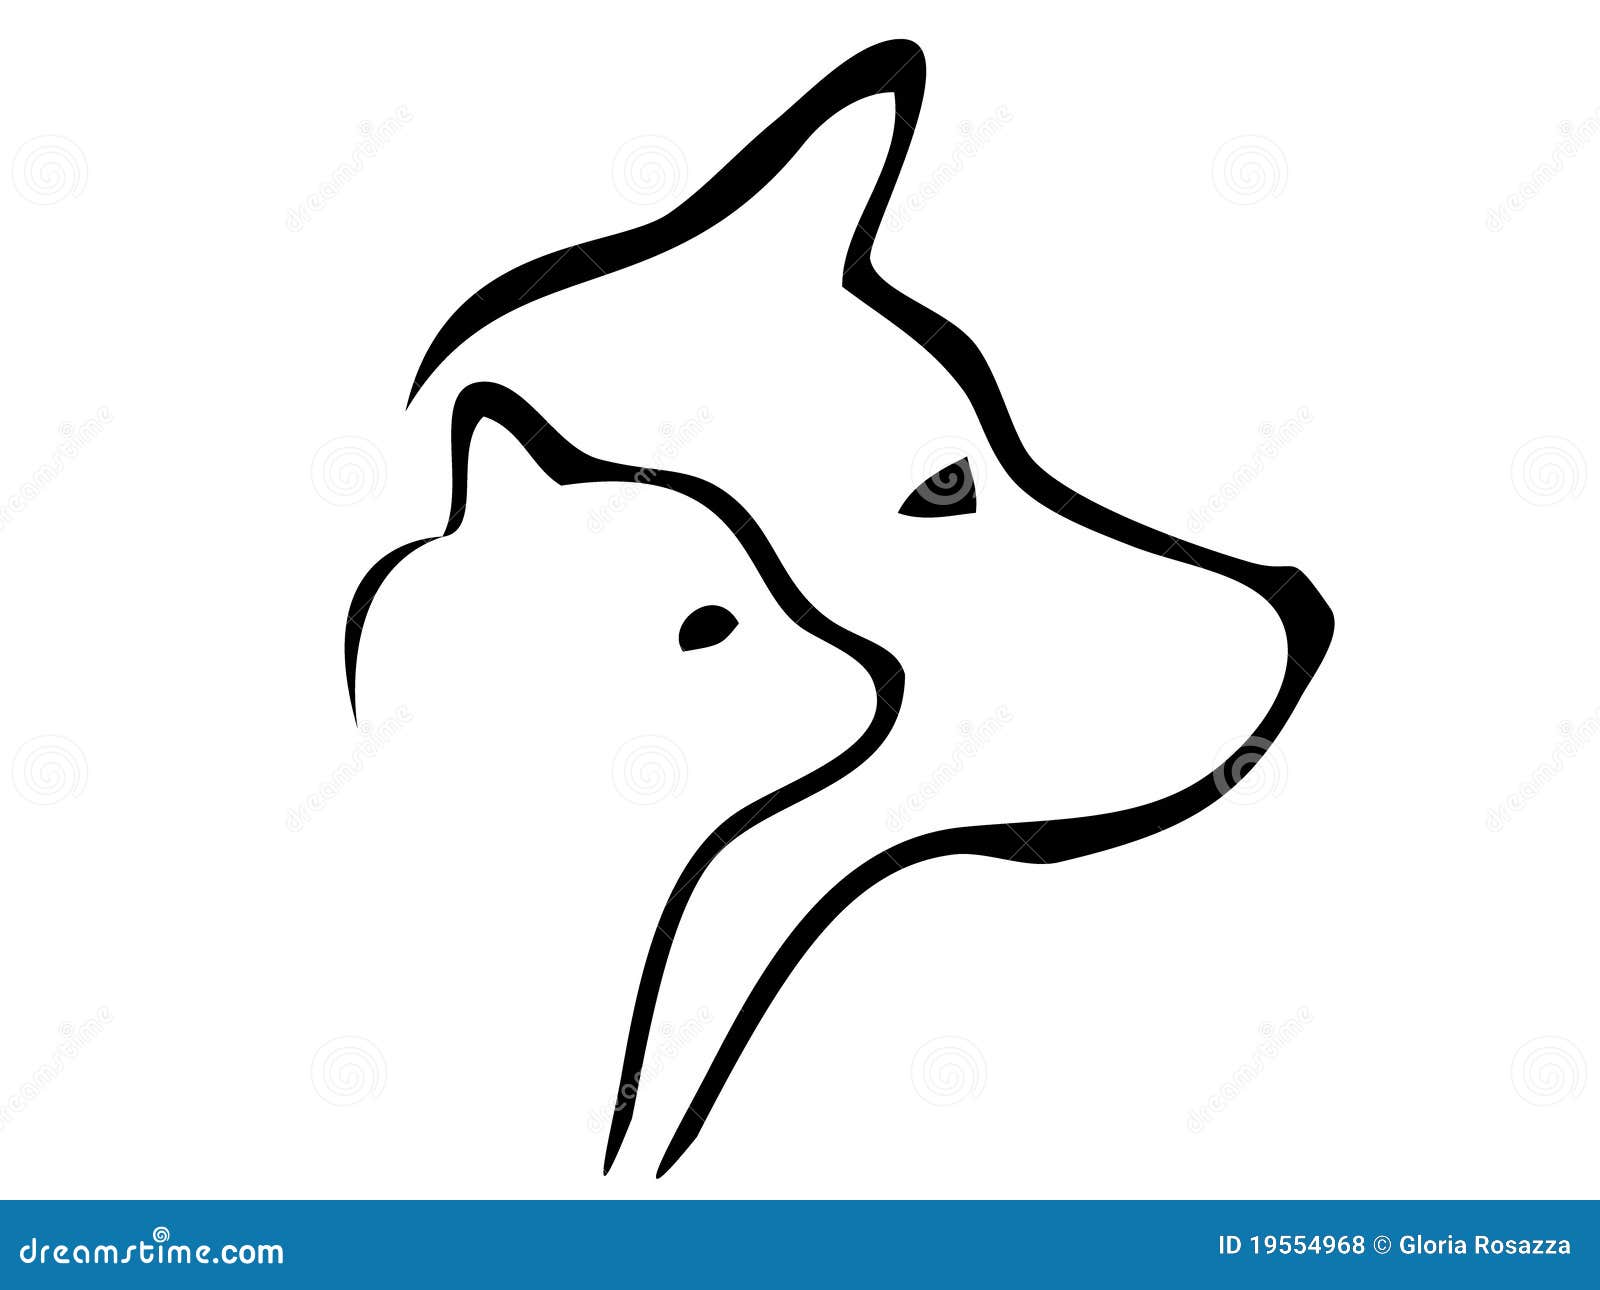 free clipart of dog and cat together - photo #32